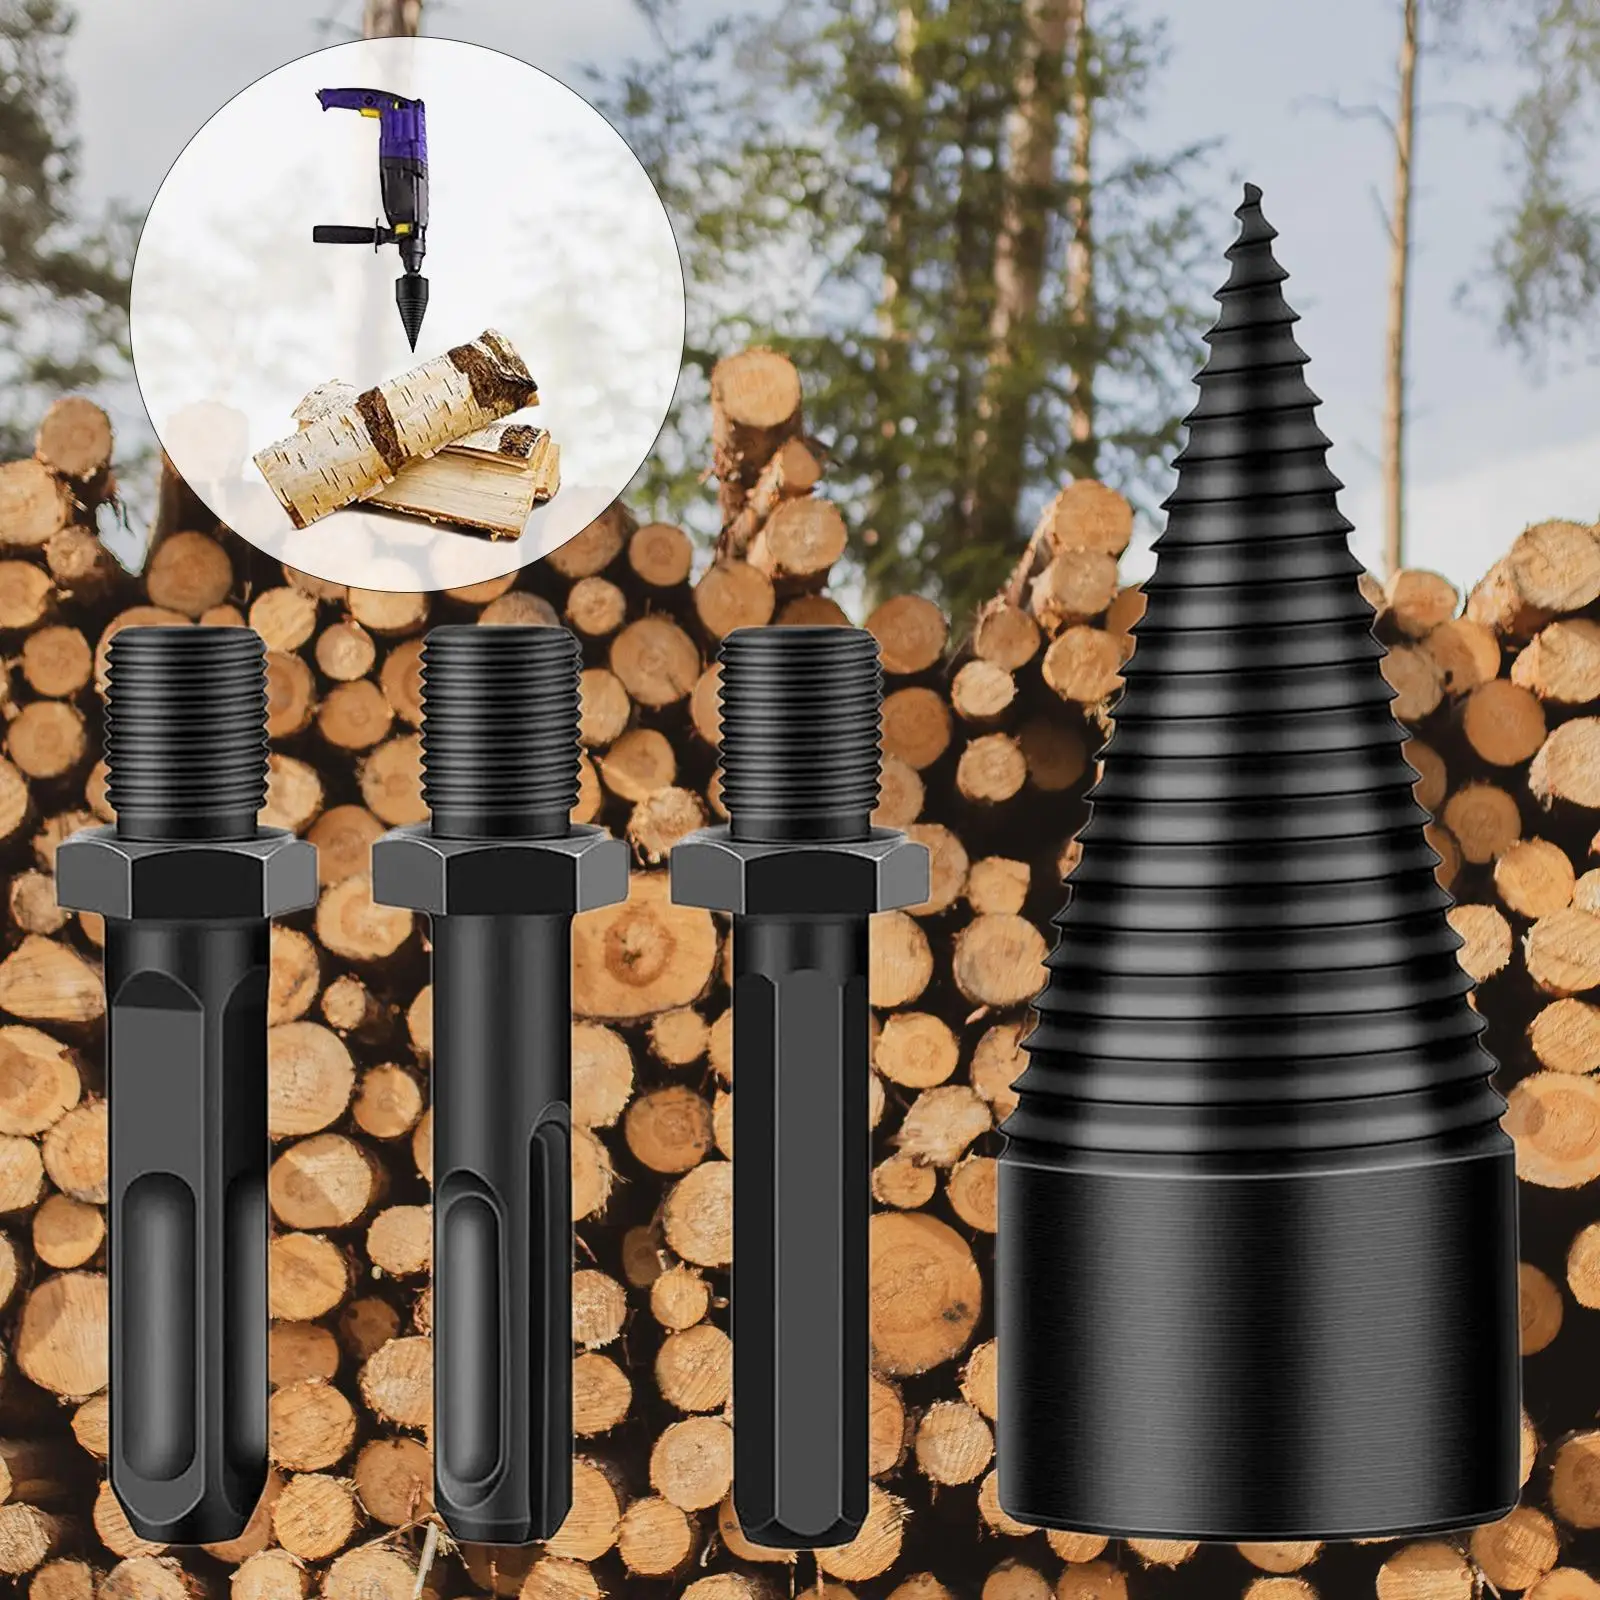 42 Splitter Screw Splitting Cone Driver with Round + Hex + Square,Removable Firewood Log Splitter Drill Bit for Household